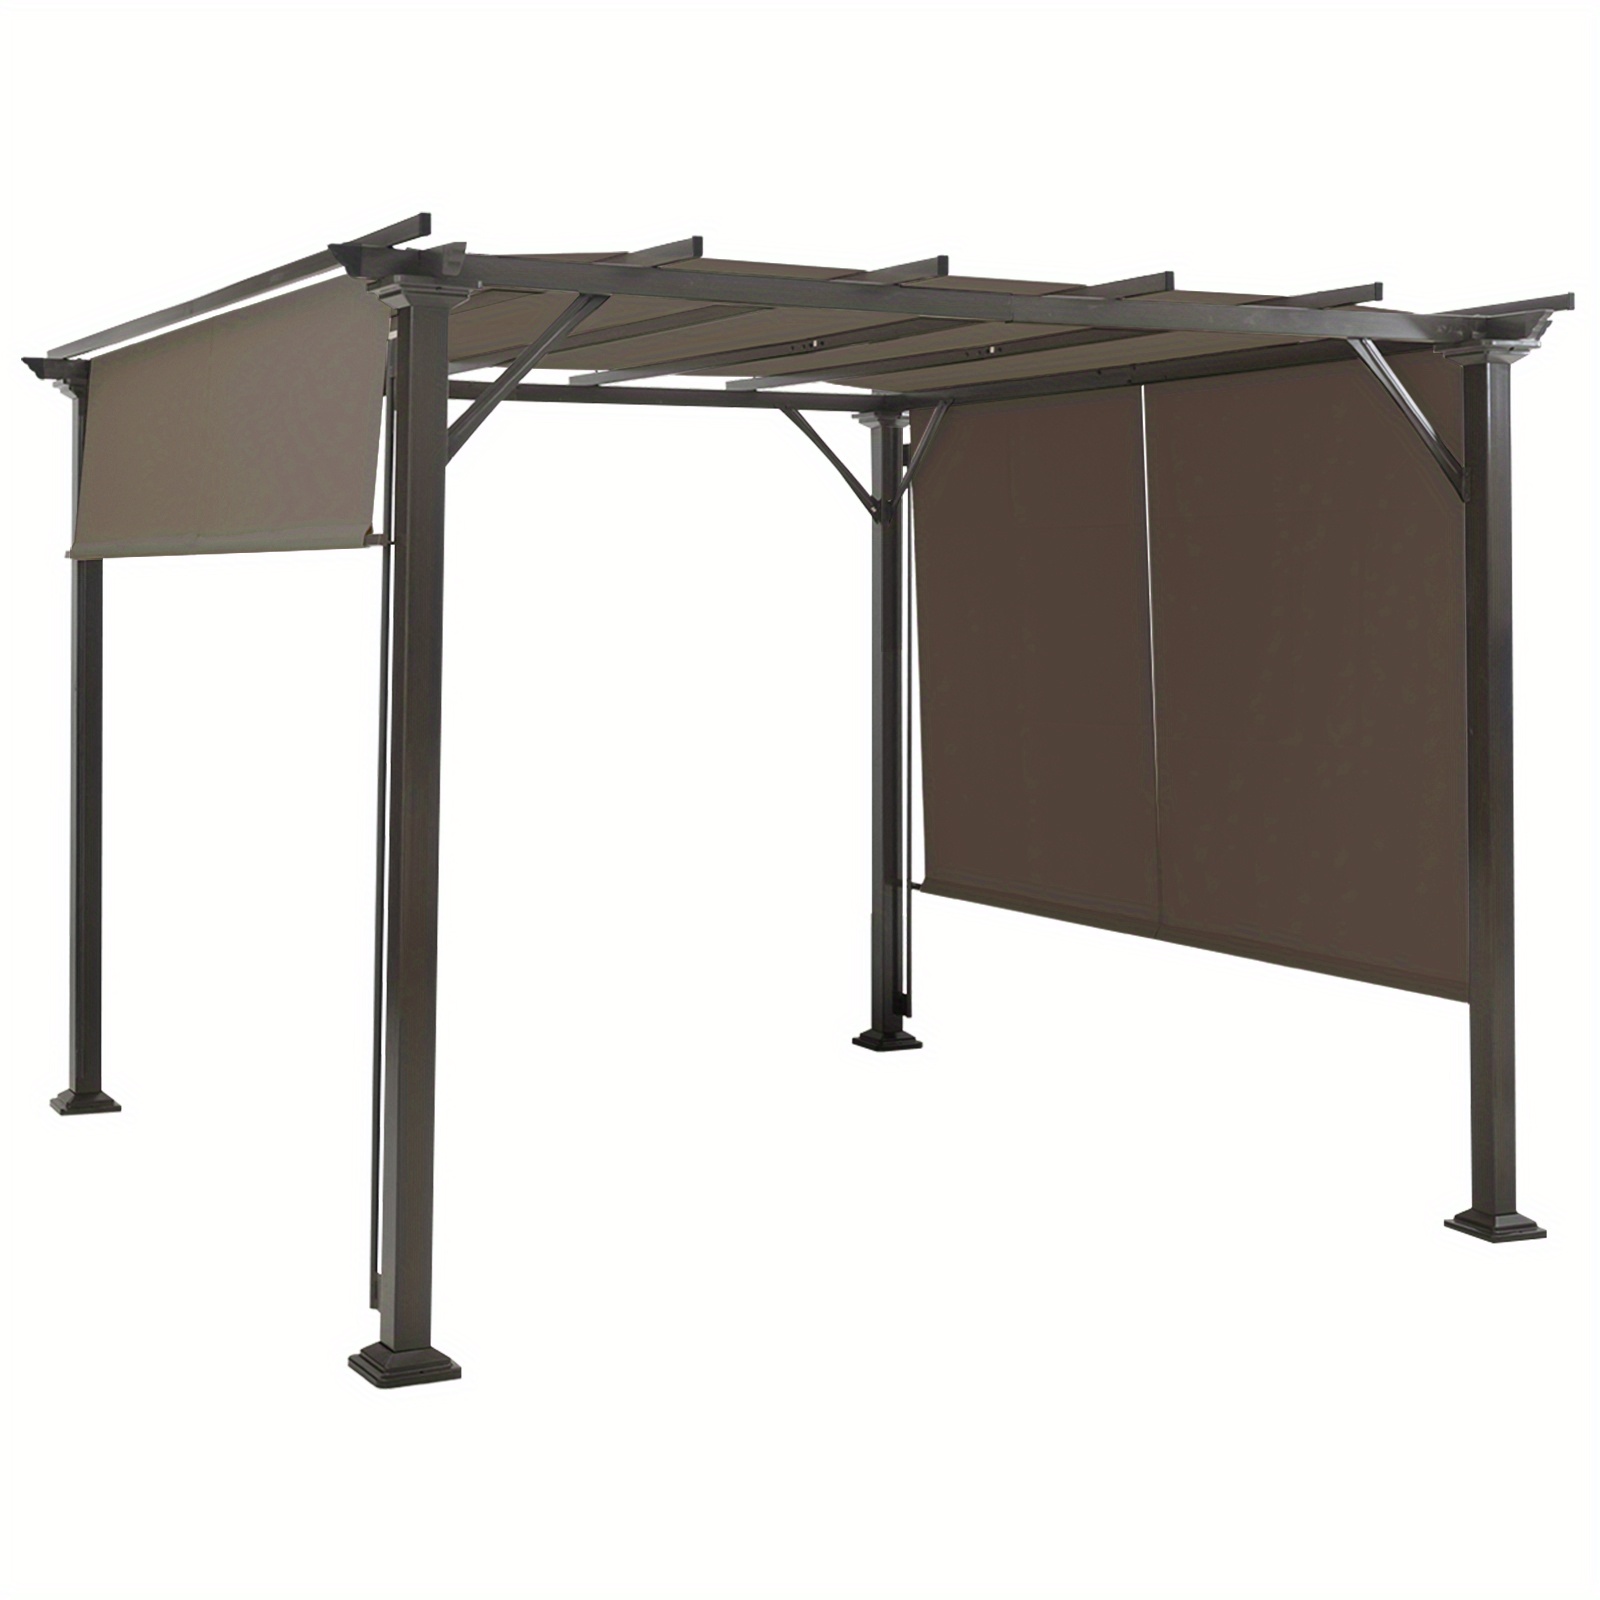 

Maxmass 2pcs 16x4 Ft Universal Replacement Canopy For Pergola Structure Sun Awning Brown